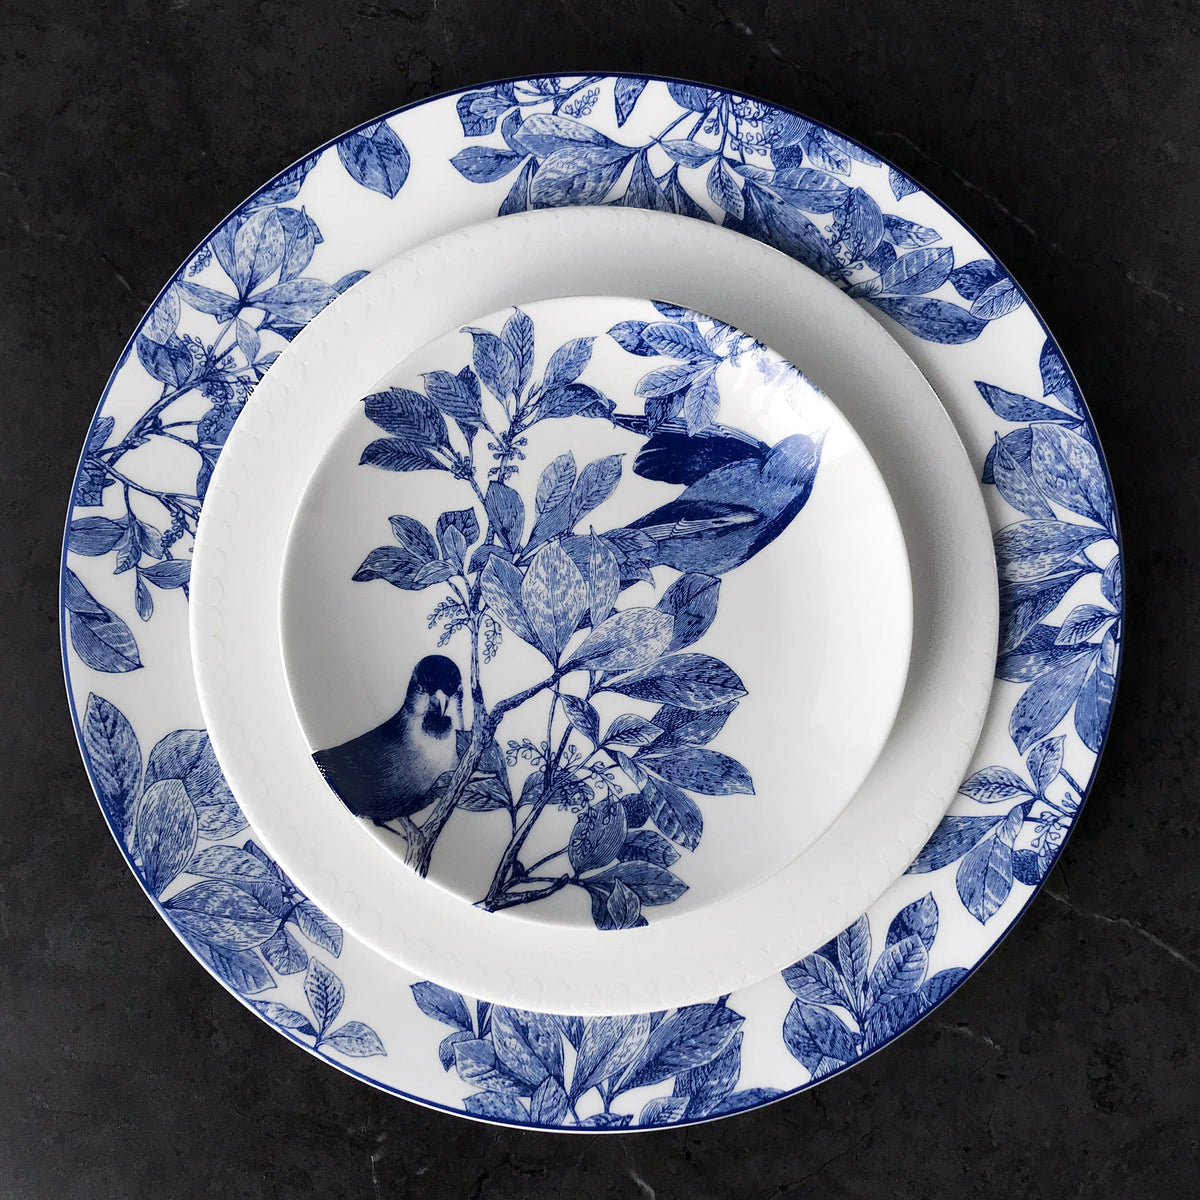 An Arbor Blue Birds Canapé plate with blue and white birds on it by Caskata Artisanal Home.